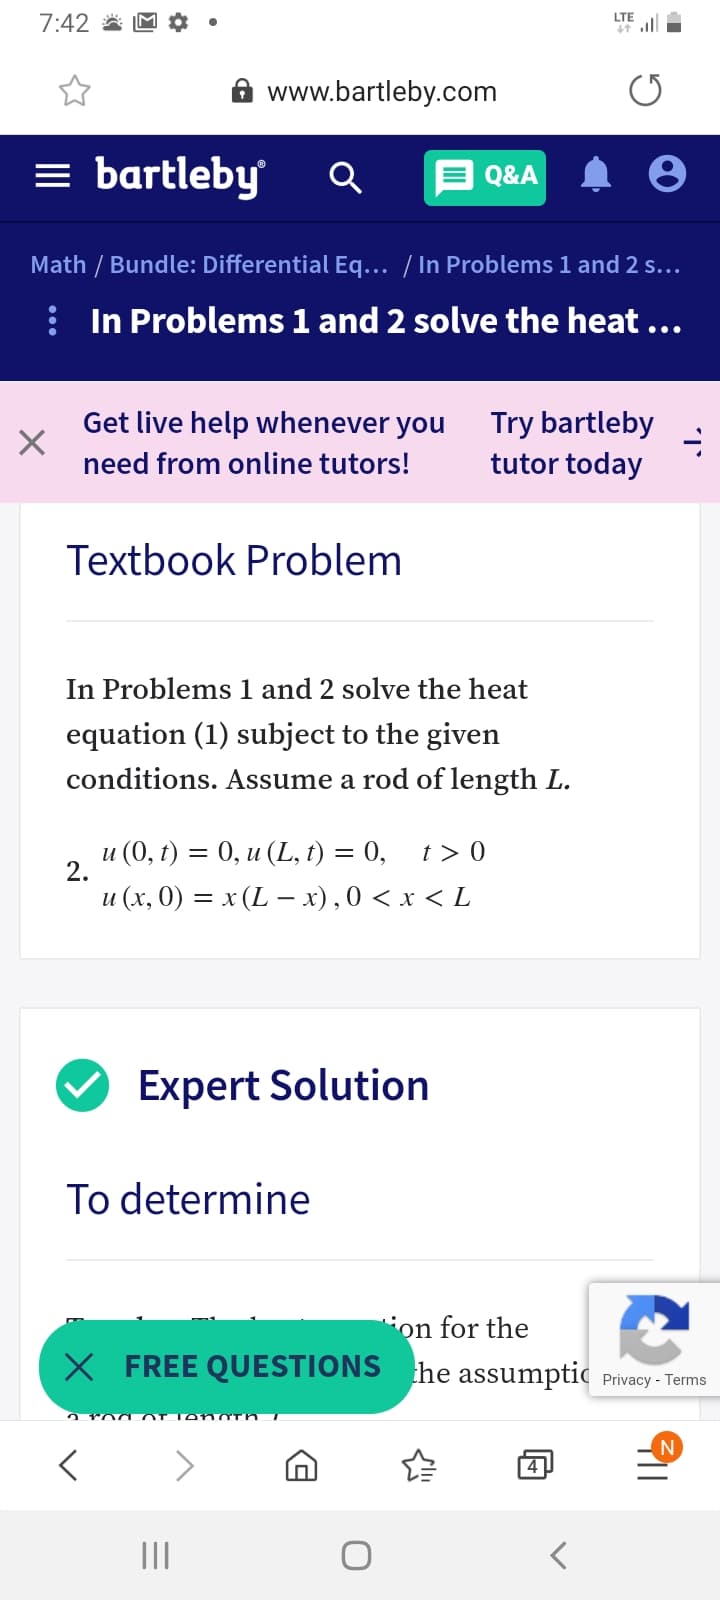 7:42 *
LTE
ill
A www.bartleby.com
= bartleby
E Q&A
Math / Bundle: Differential Eq... / In Problems 1 and 2 s...
: In Problems 1 and 2 solve the heat ...
Get live help whenever you
Try bartleby
tutor today
need from online tutors!
Textbook Problem
In Problems 1 and 2 solve the heat
equation (1) subject to the given
conditions. Assume a rod of length L.
и (0, t) — 0, и (L, t) 3D 0,
2.
t > 0
и (х, 0) — х (L — х),0 <х<L
Expert Solution
To determine
ion for the
X FREE QUESTIONS he assumptic Privacy - Terms
N
4
